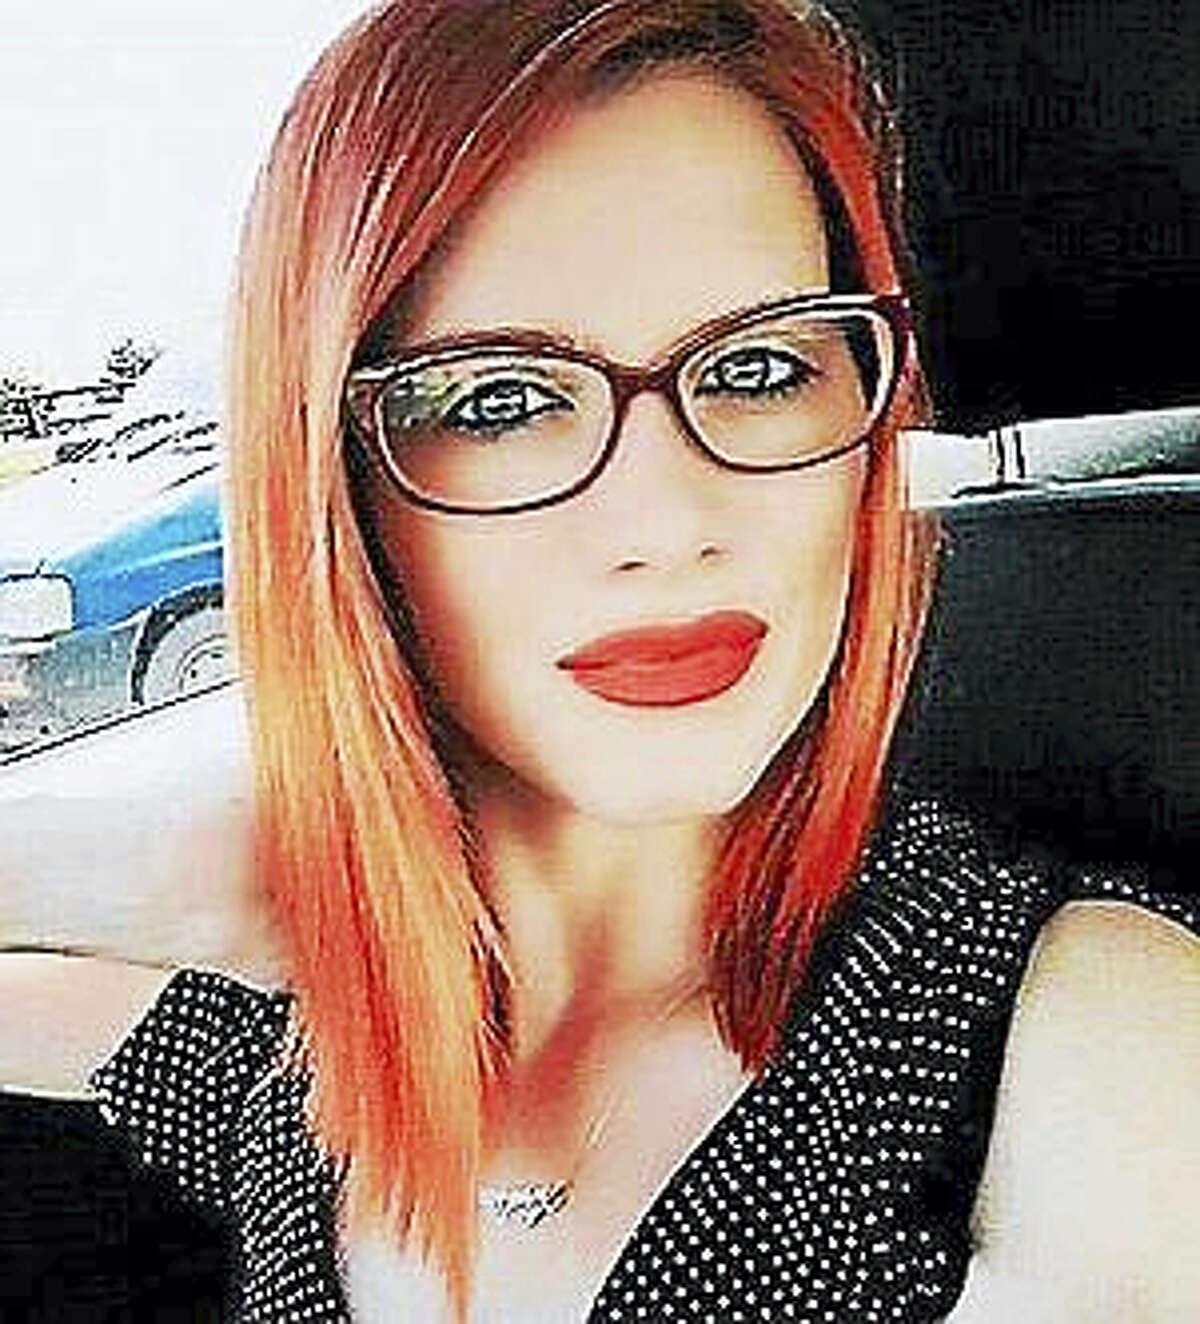 Image released through the Metropolitan Police on Friday April 7, 2017, of Andreea Cristea. Cristea, a 31-year-old Romanian tourist who was knocked into the River Thames from Westminster Bridge during an attack on Britain’s Houses of Parliament more than two weeks ago has died, London police said Friday.